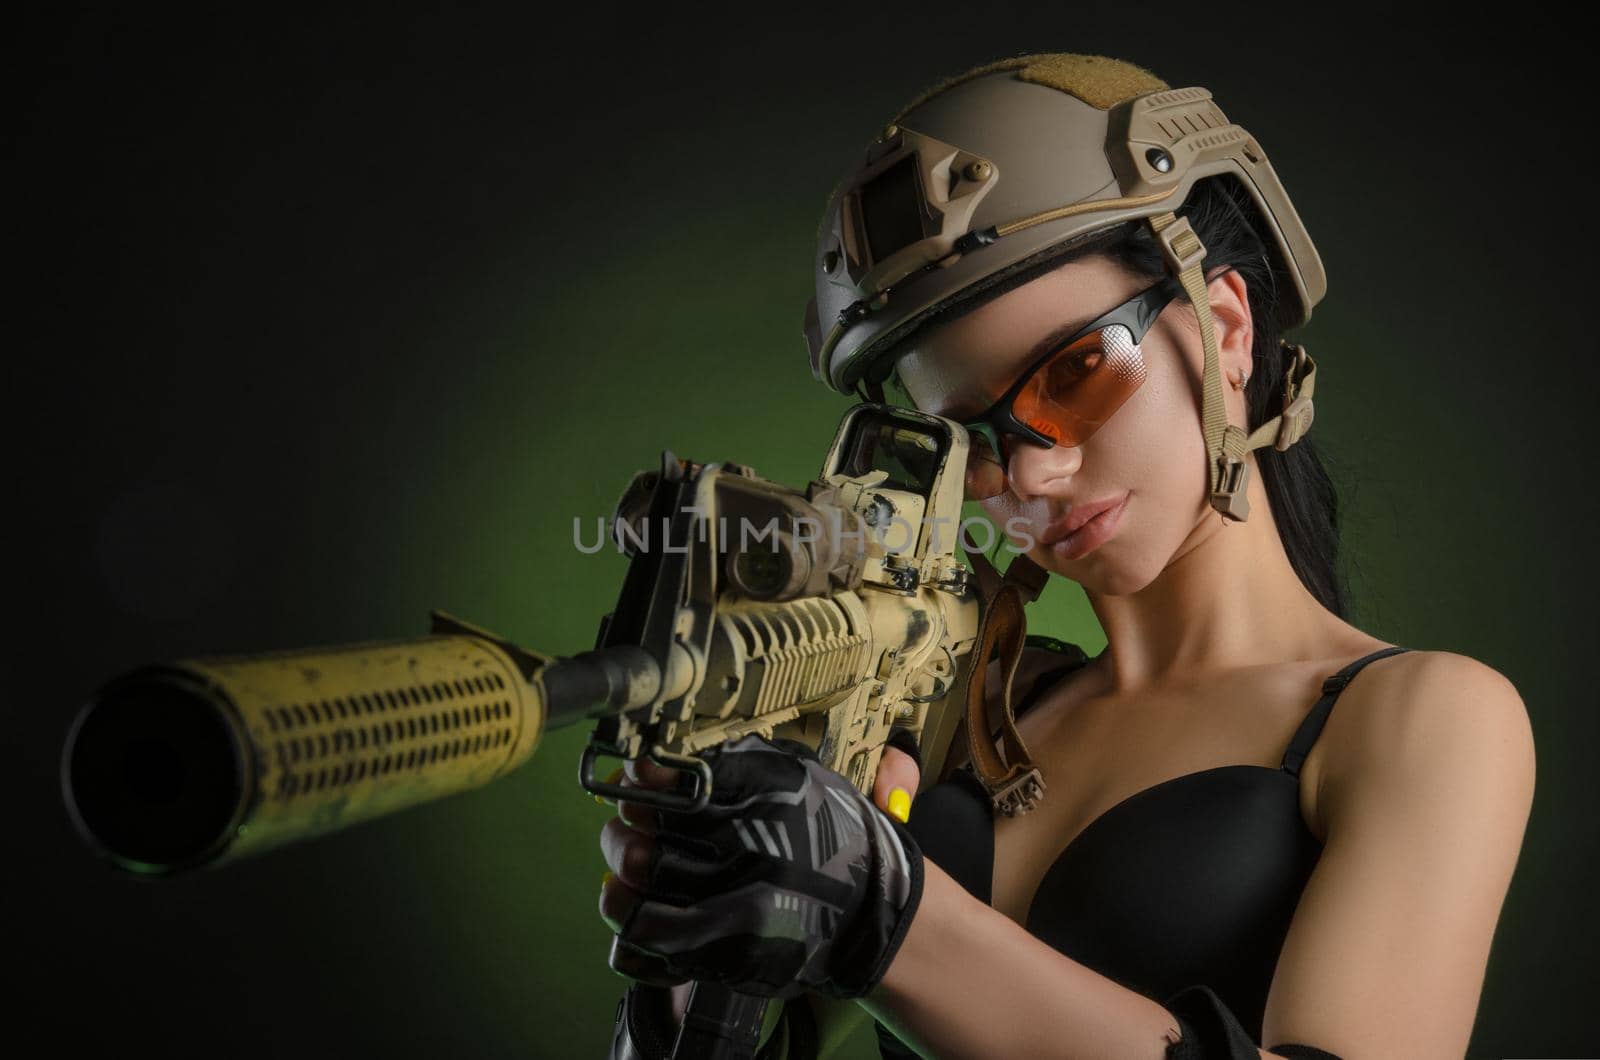 girl in military overalls airsoft posing with a gun in his hands on a dark background in the haze